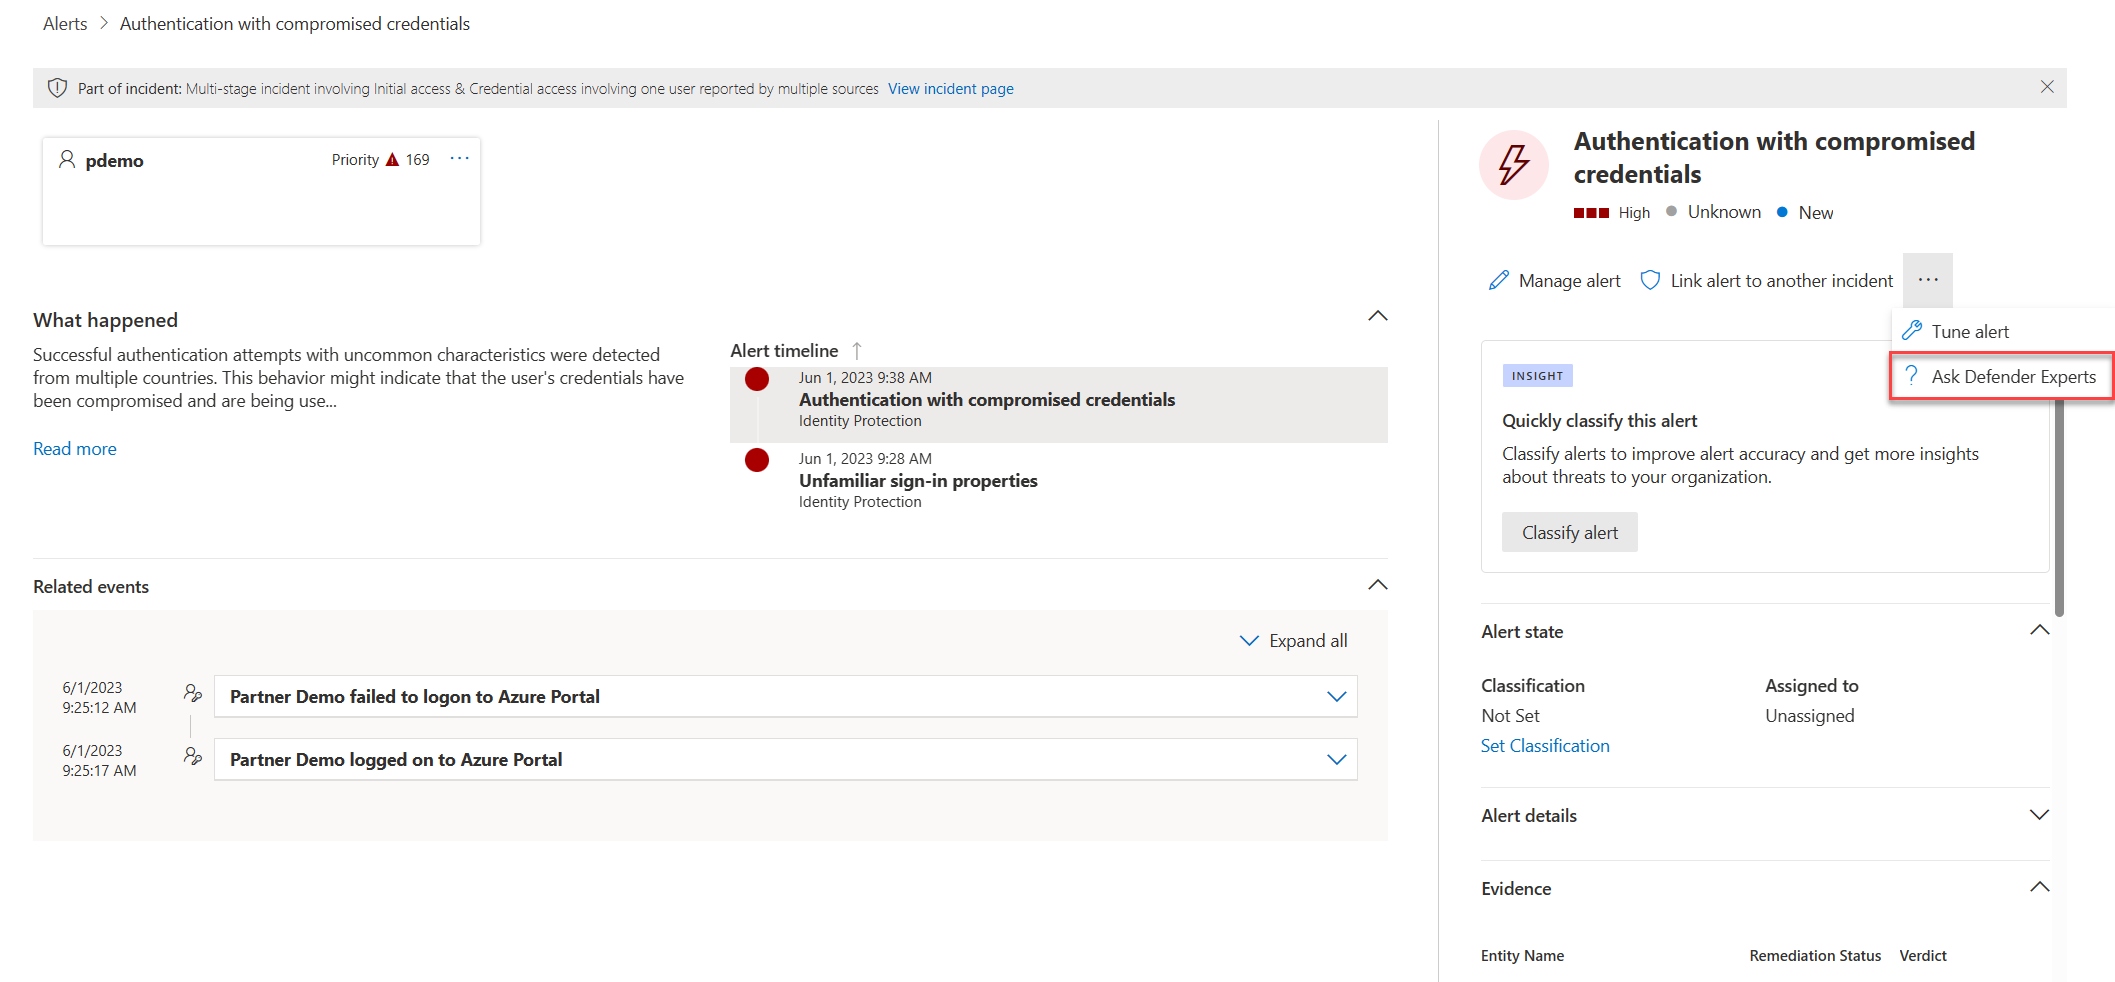 Screenshot of the Ask Defender Experts menu option in the Alerts page flyout menu in the Microsoft Defender portal.